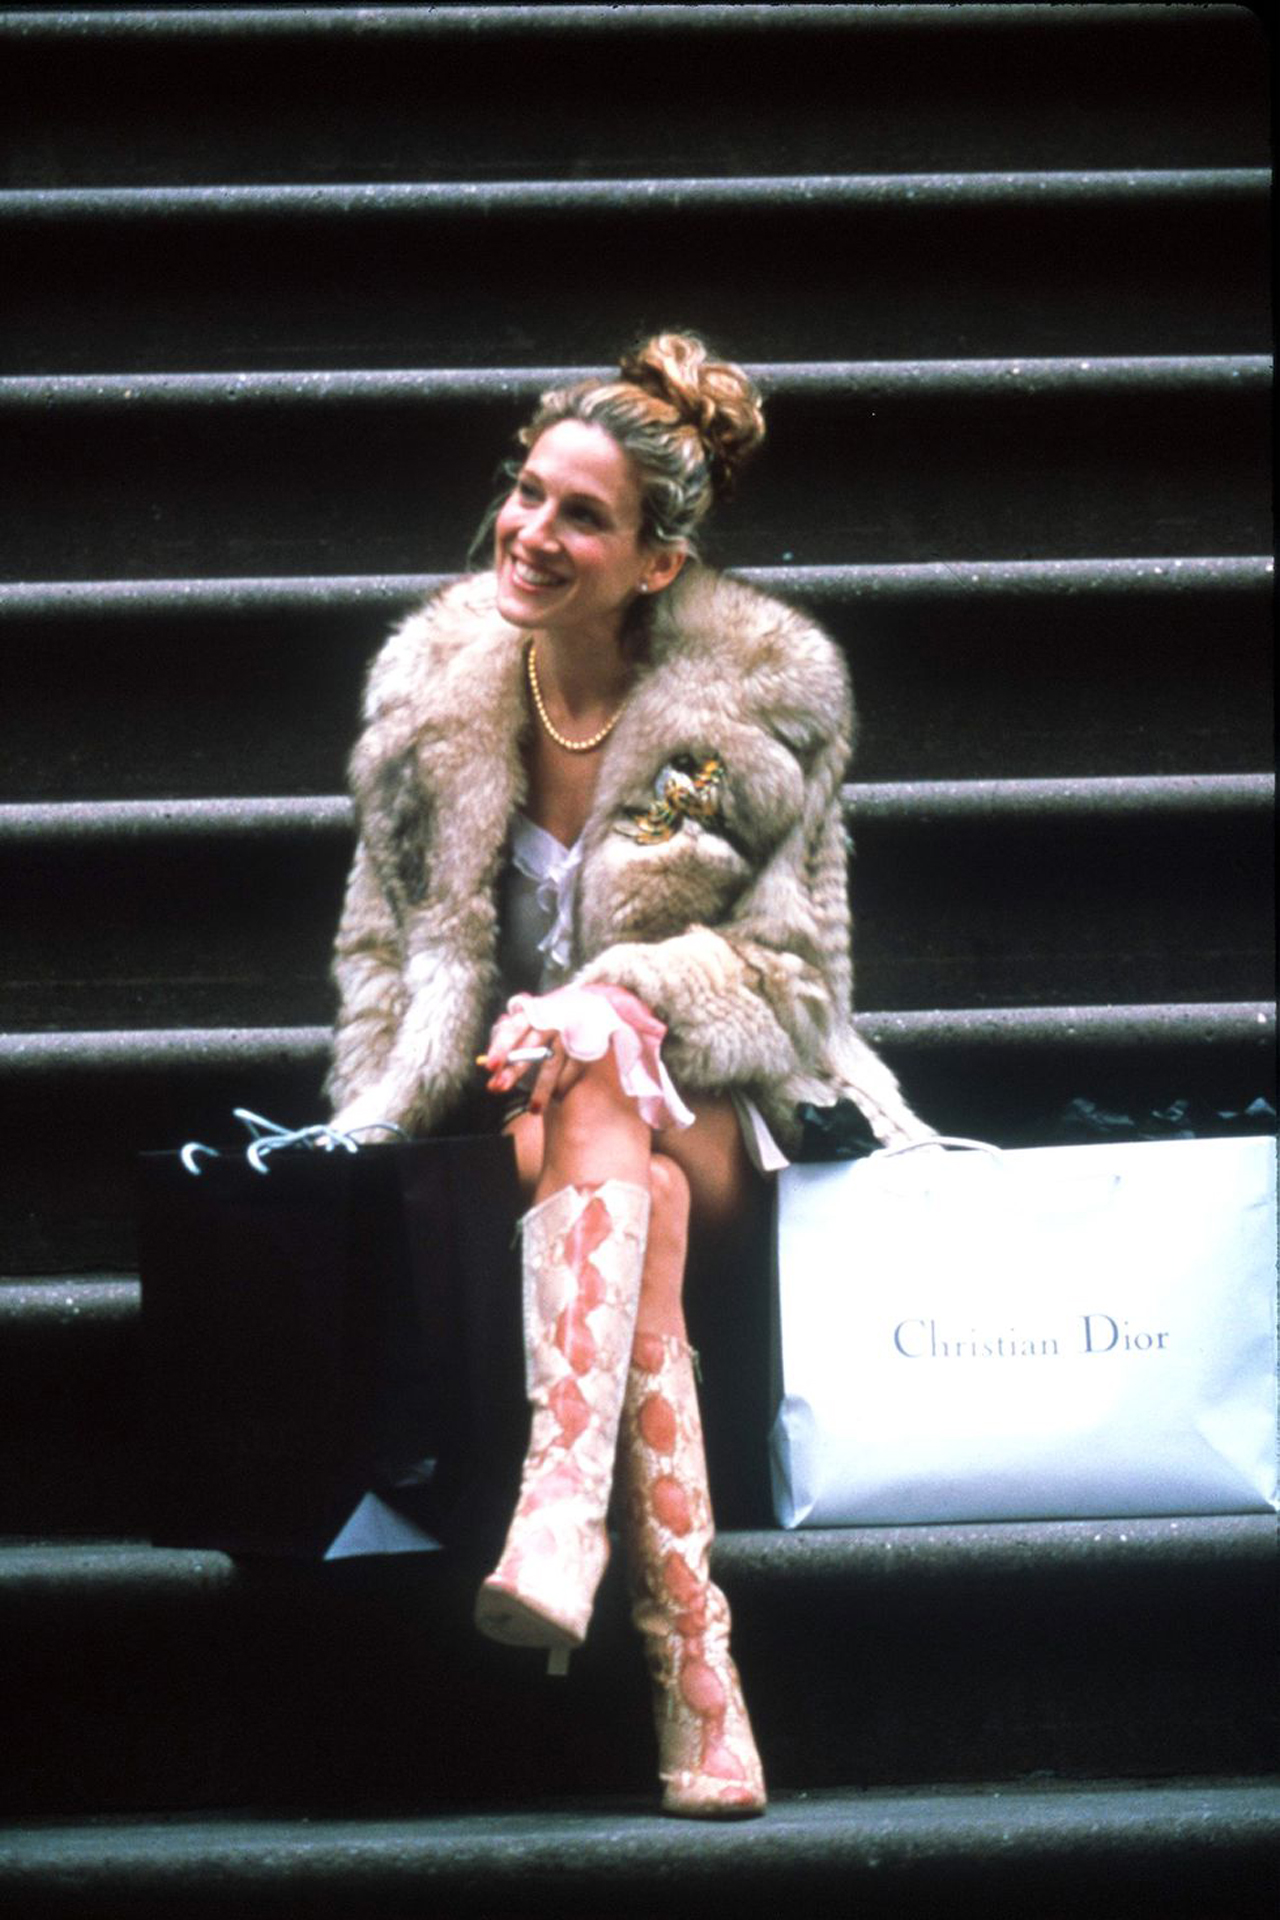 Channeling Carrie Bradshaw. An Ode To Two Decades Of SATC Fashionation